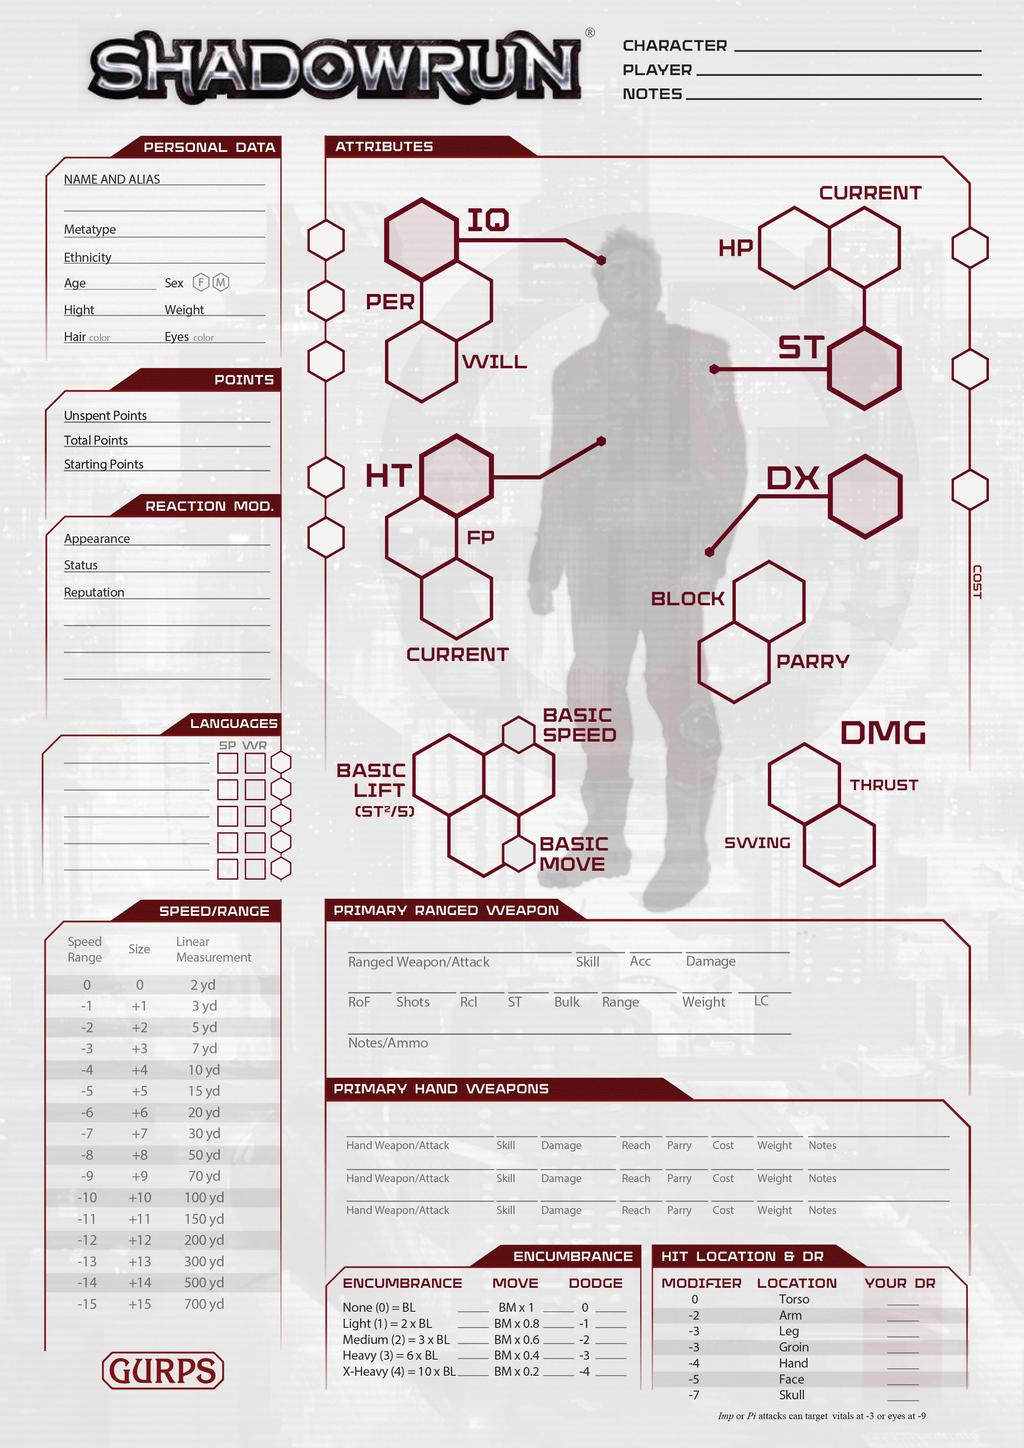 GURPS shadowrun character sheet - front R by Temir7 on DeviantArt